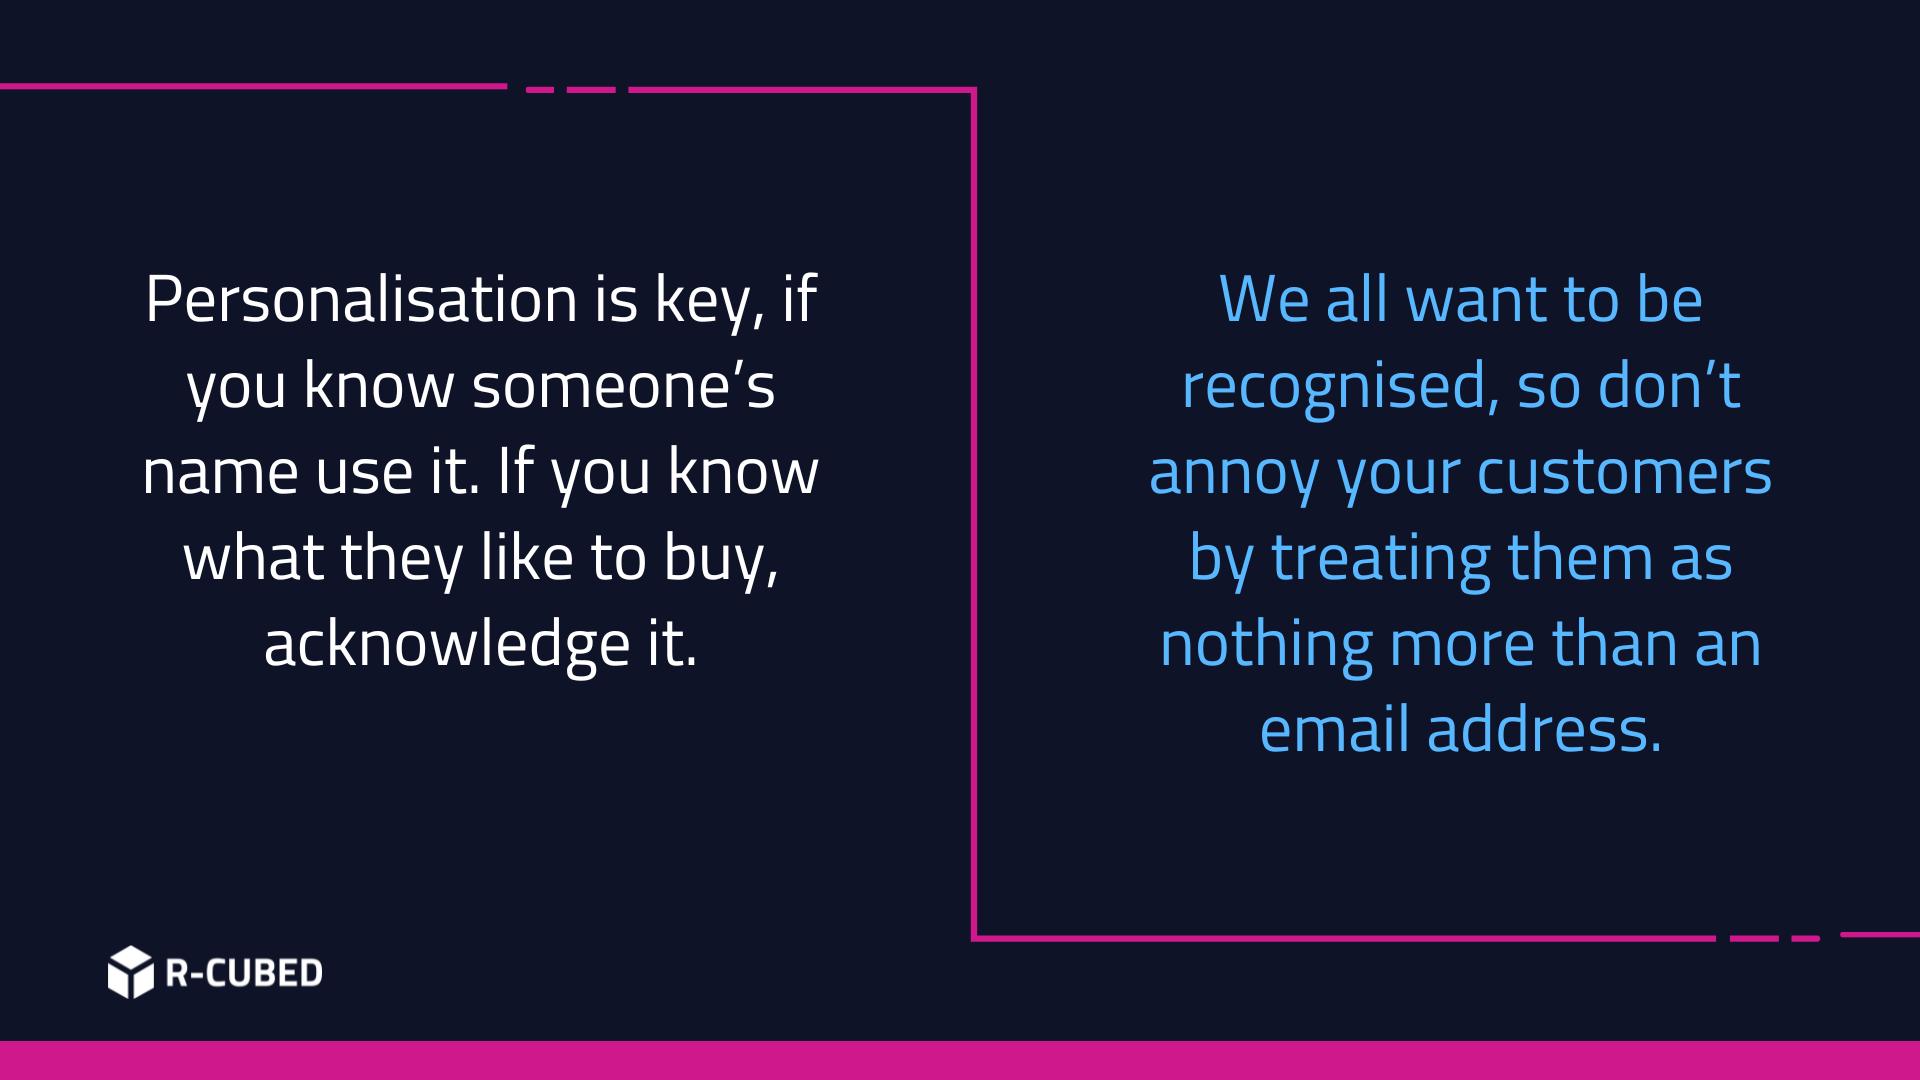 Personalisation is key, if you know someone’s name use it. If you know what they like to buy, acknowledge it. We all want to be recognised, so don’t annoy your customers by treating them as nothing more than an email address.